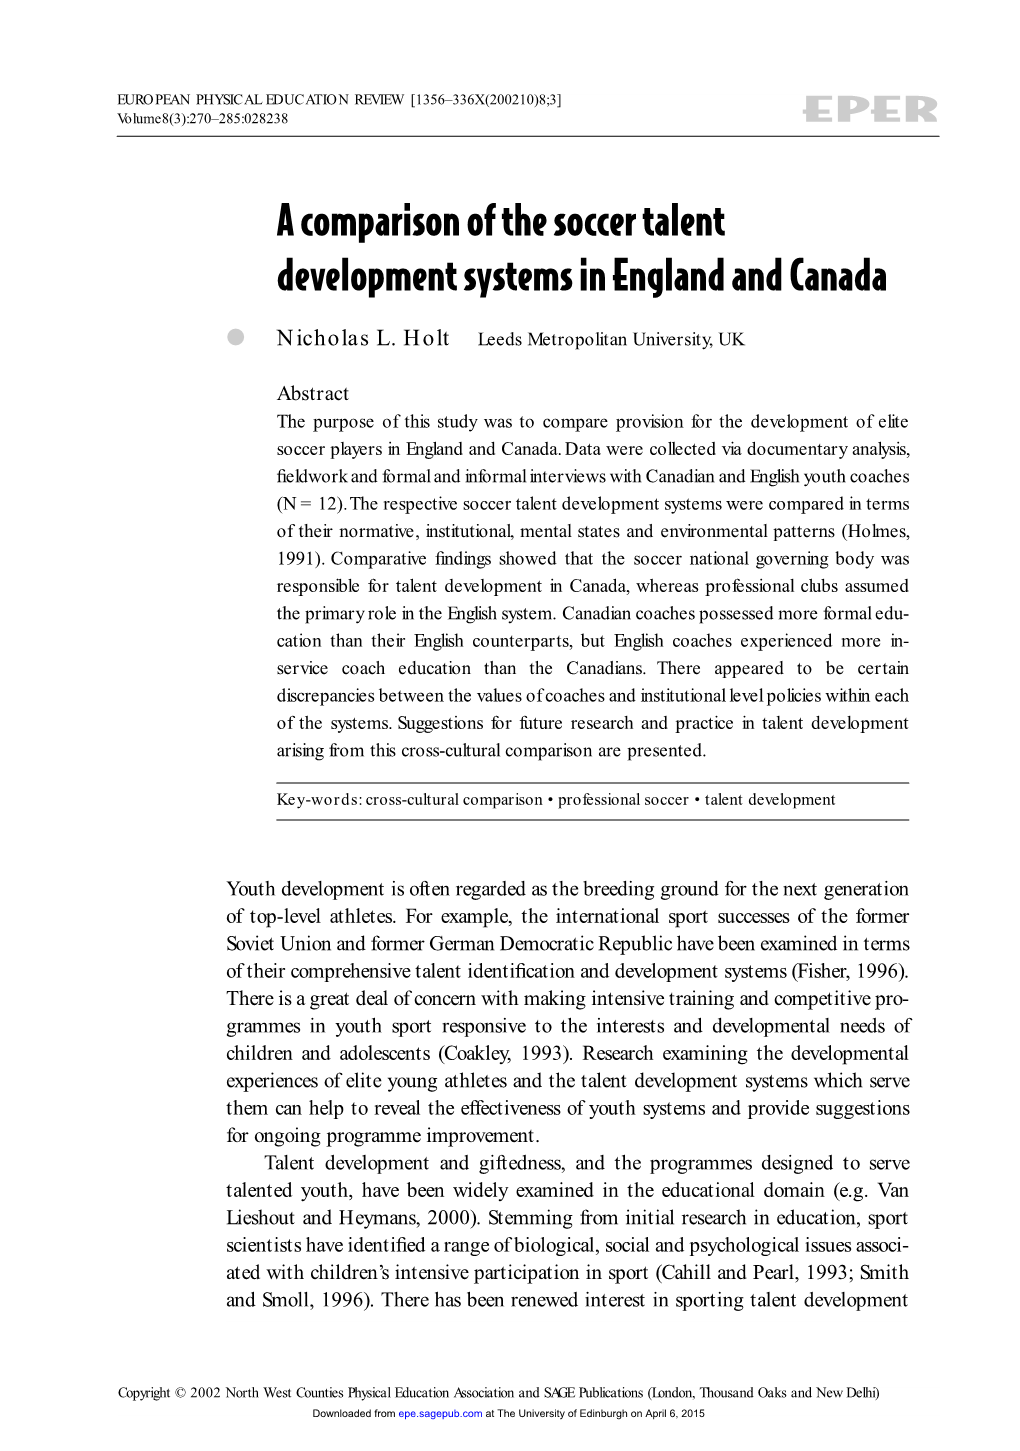 A Comparison of the Soccer Talent Development Systems in England and Canada